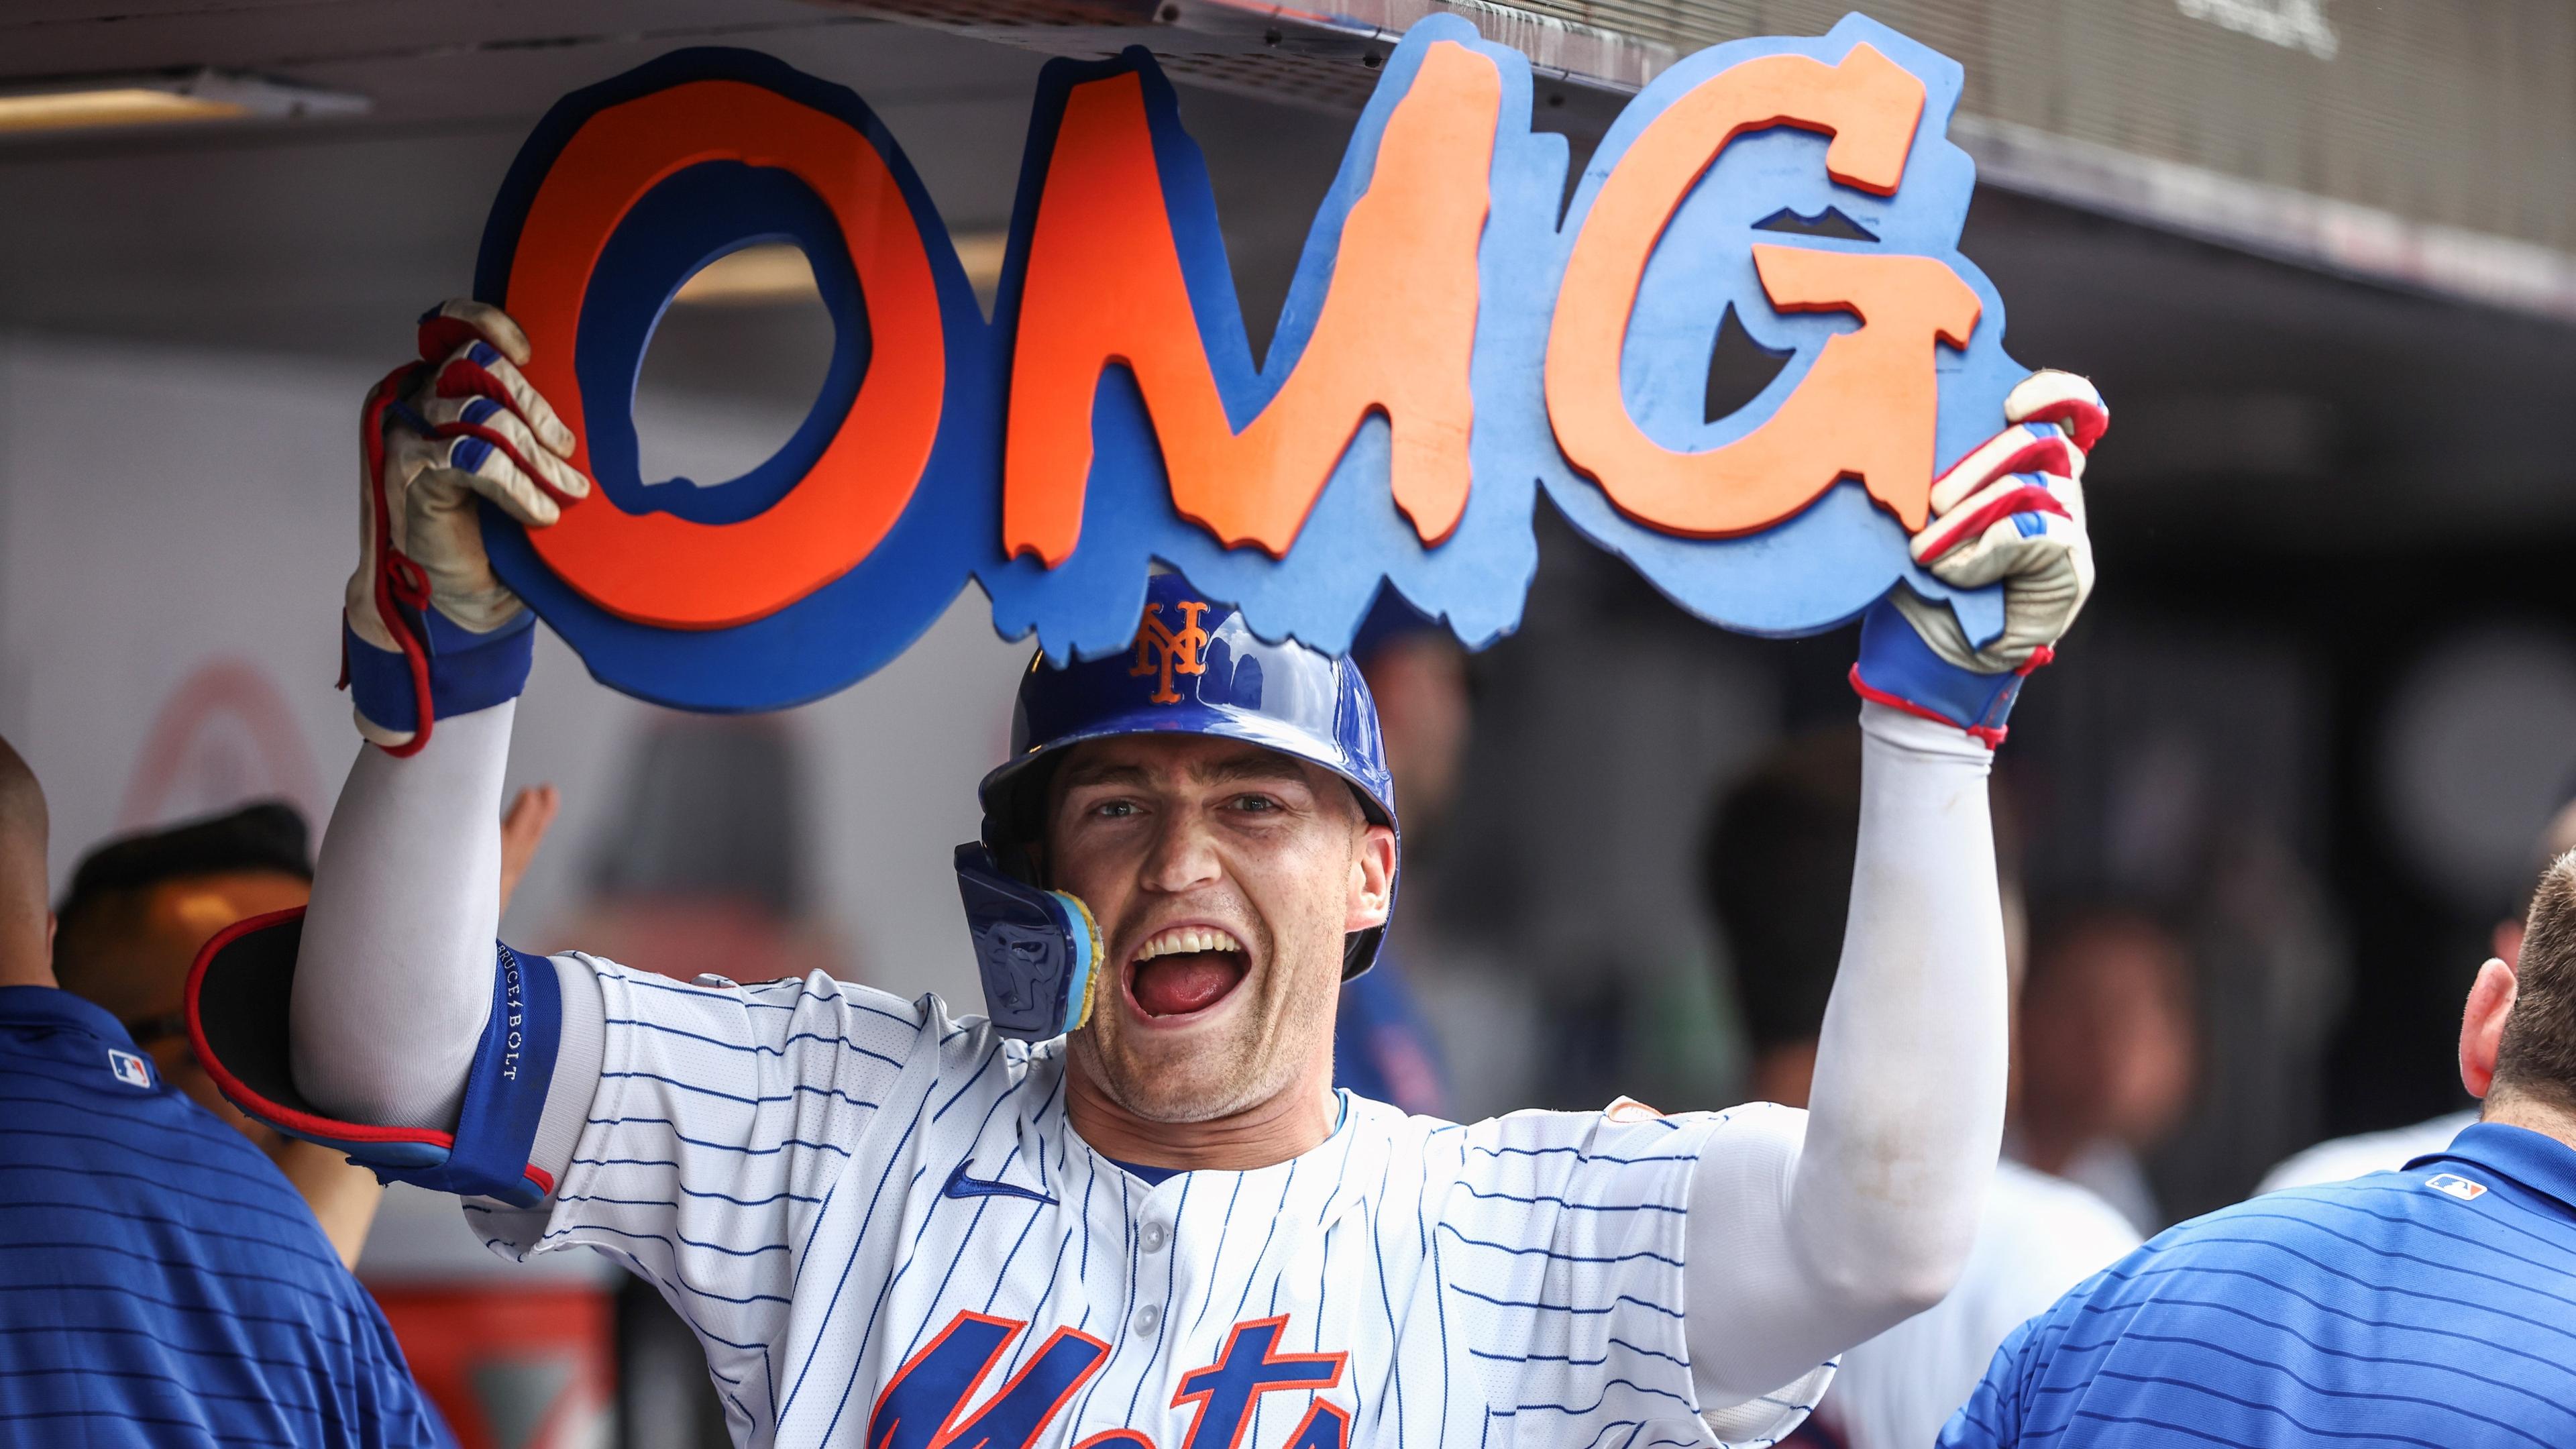 Mets' Brandon Nimmo 'proud' of 100th career home run: 'I think I've grown a lot as a player'